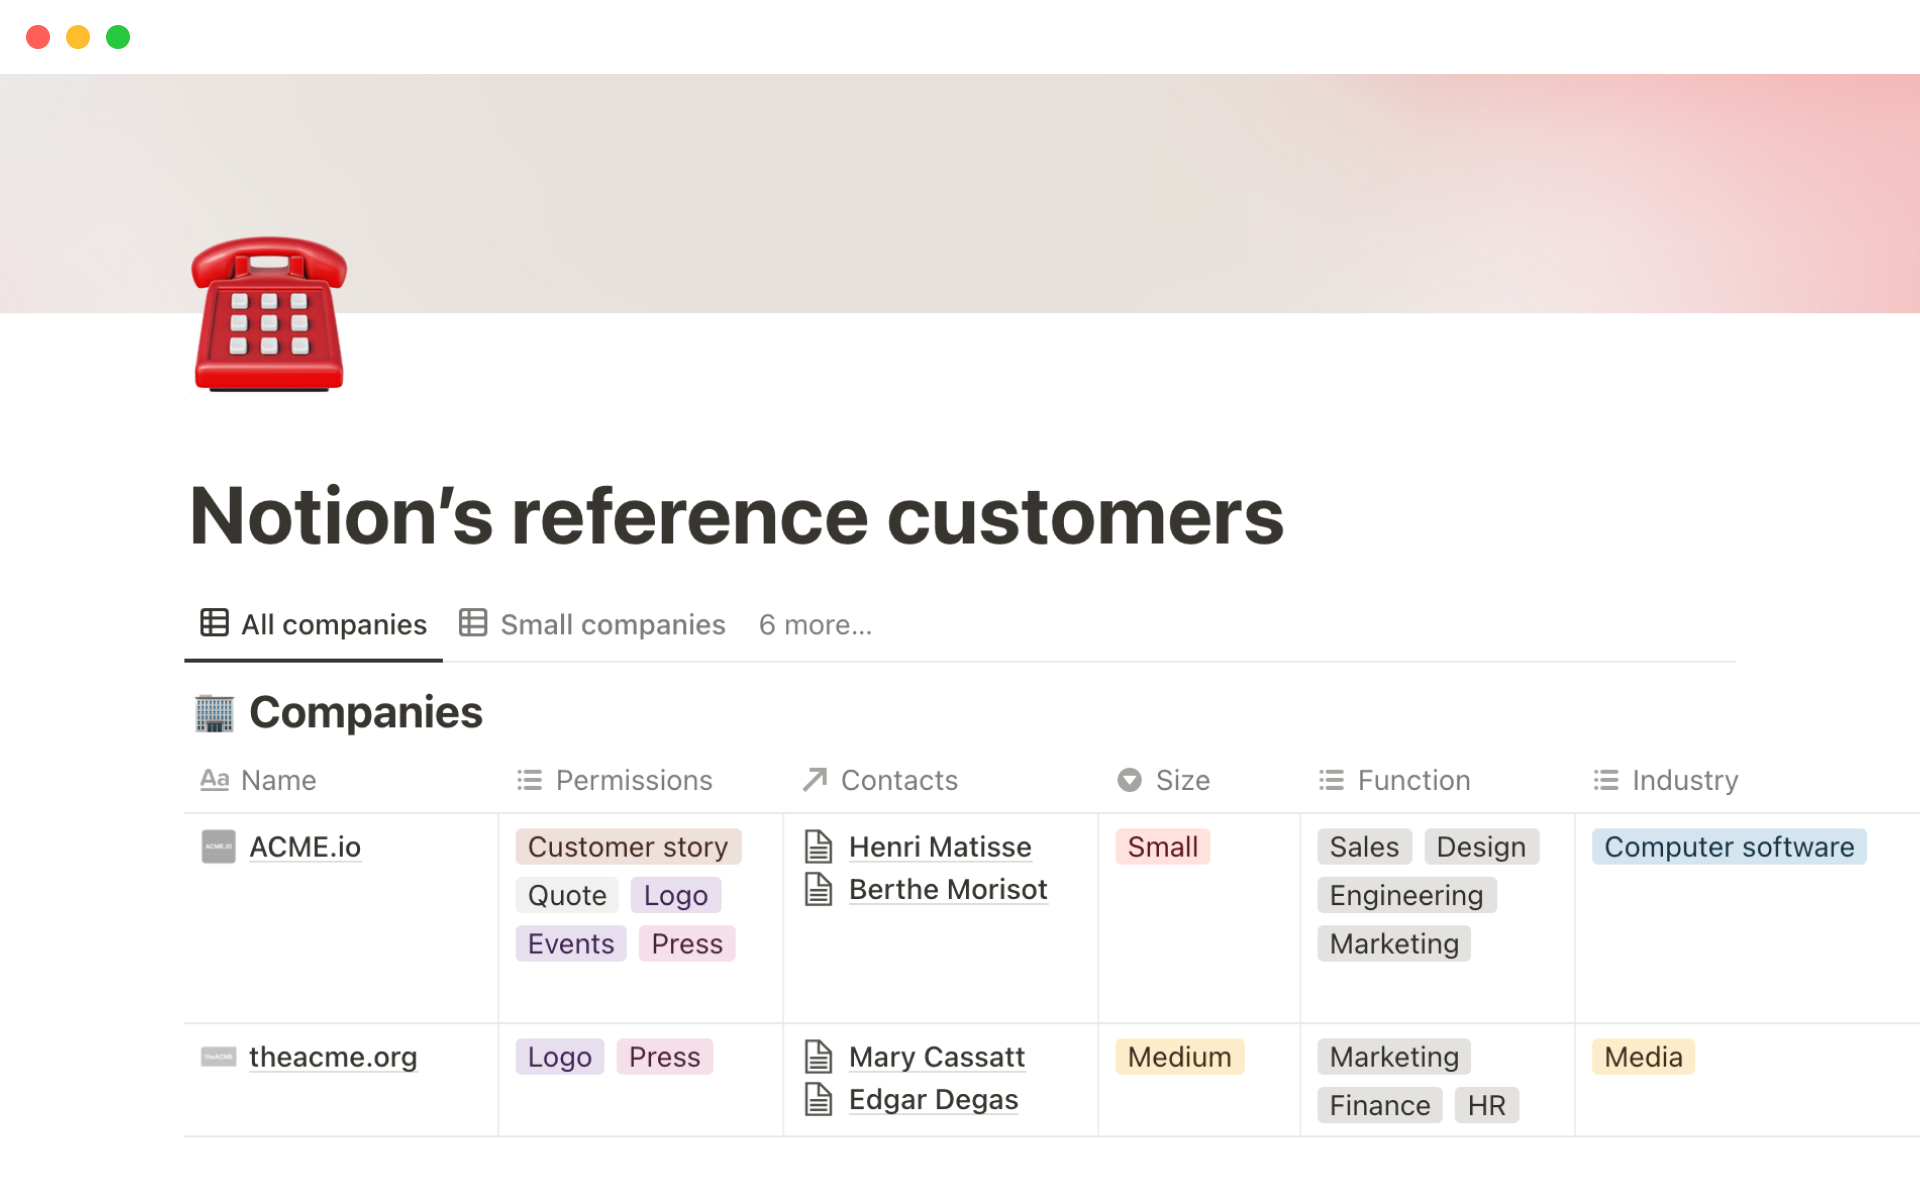 Keep up with company references and create a customer knowledge base.